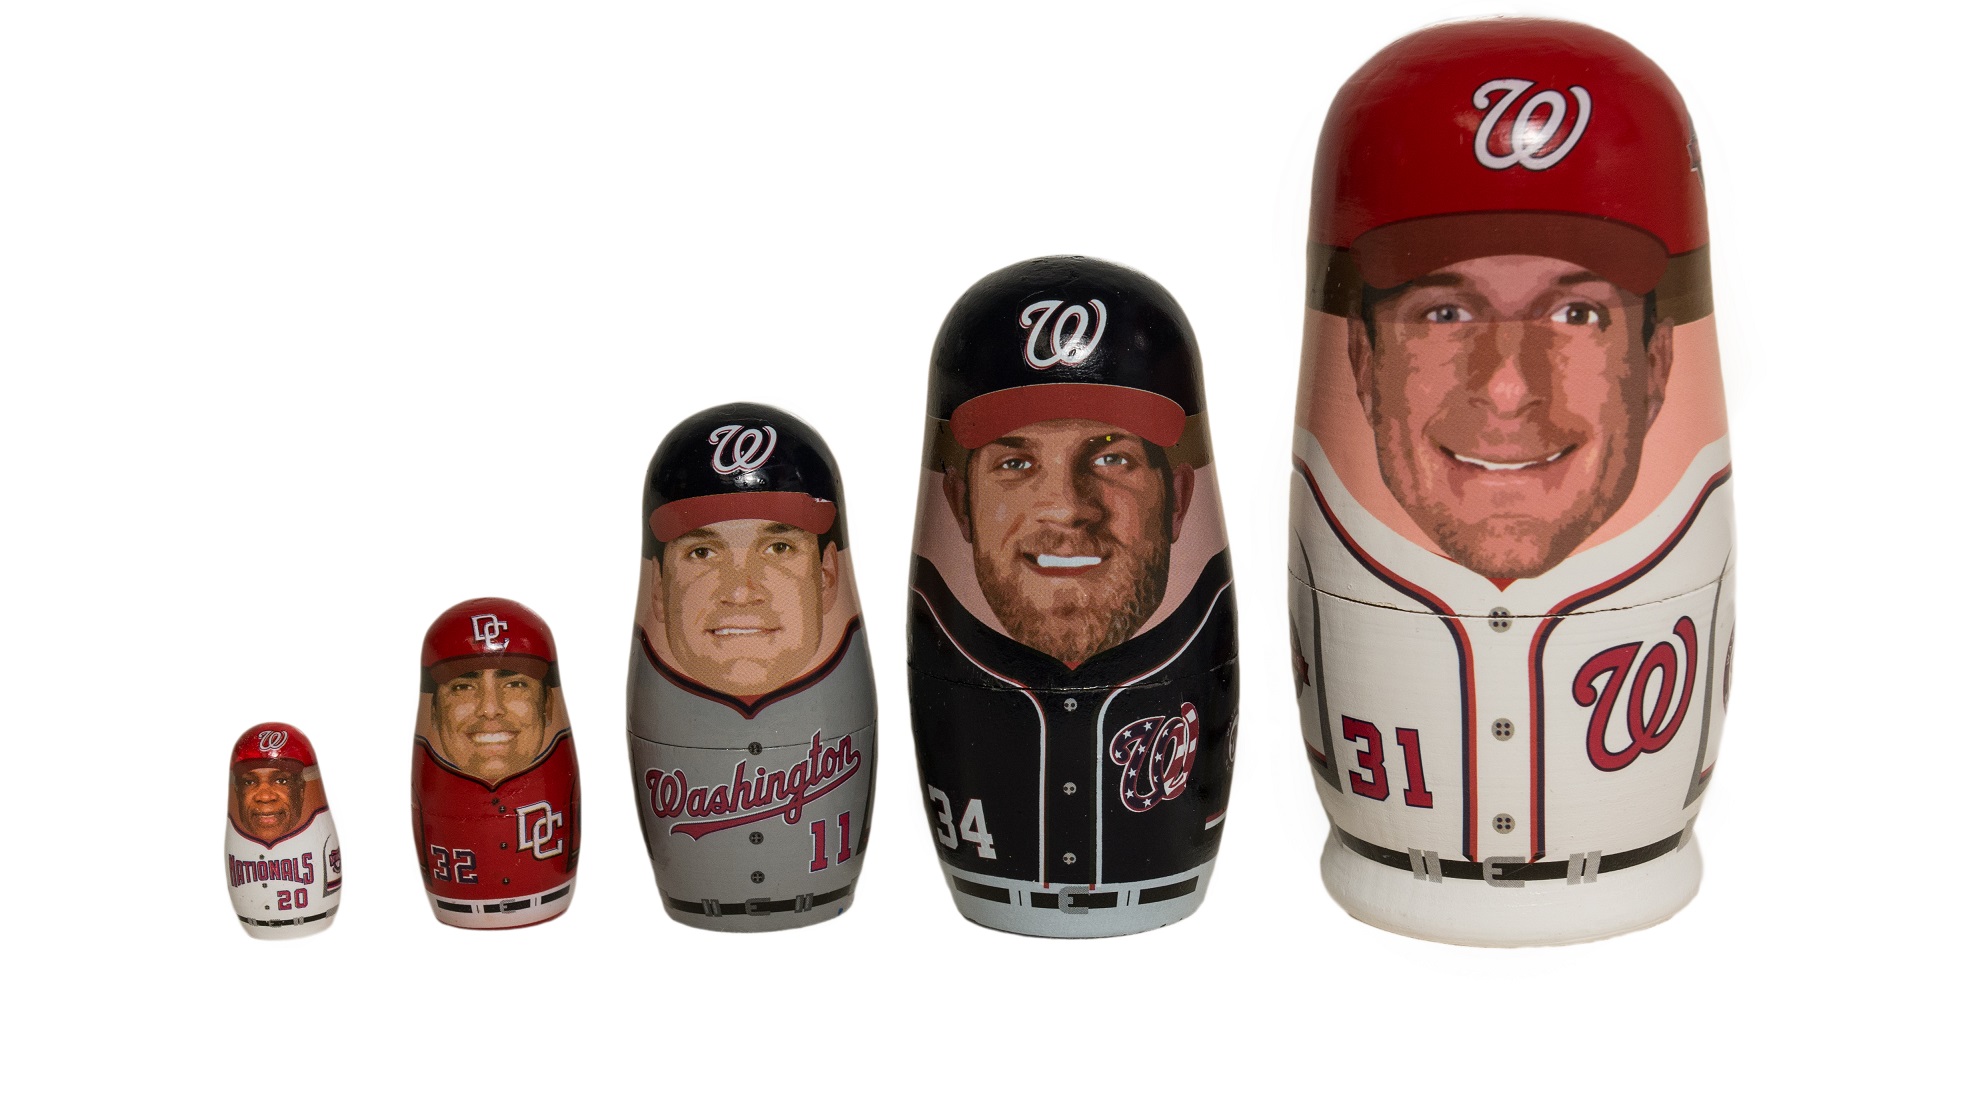 Nats giving away doll sets at Thursday night’s game